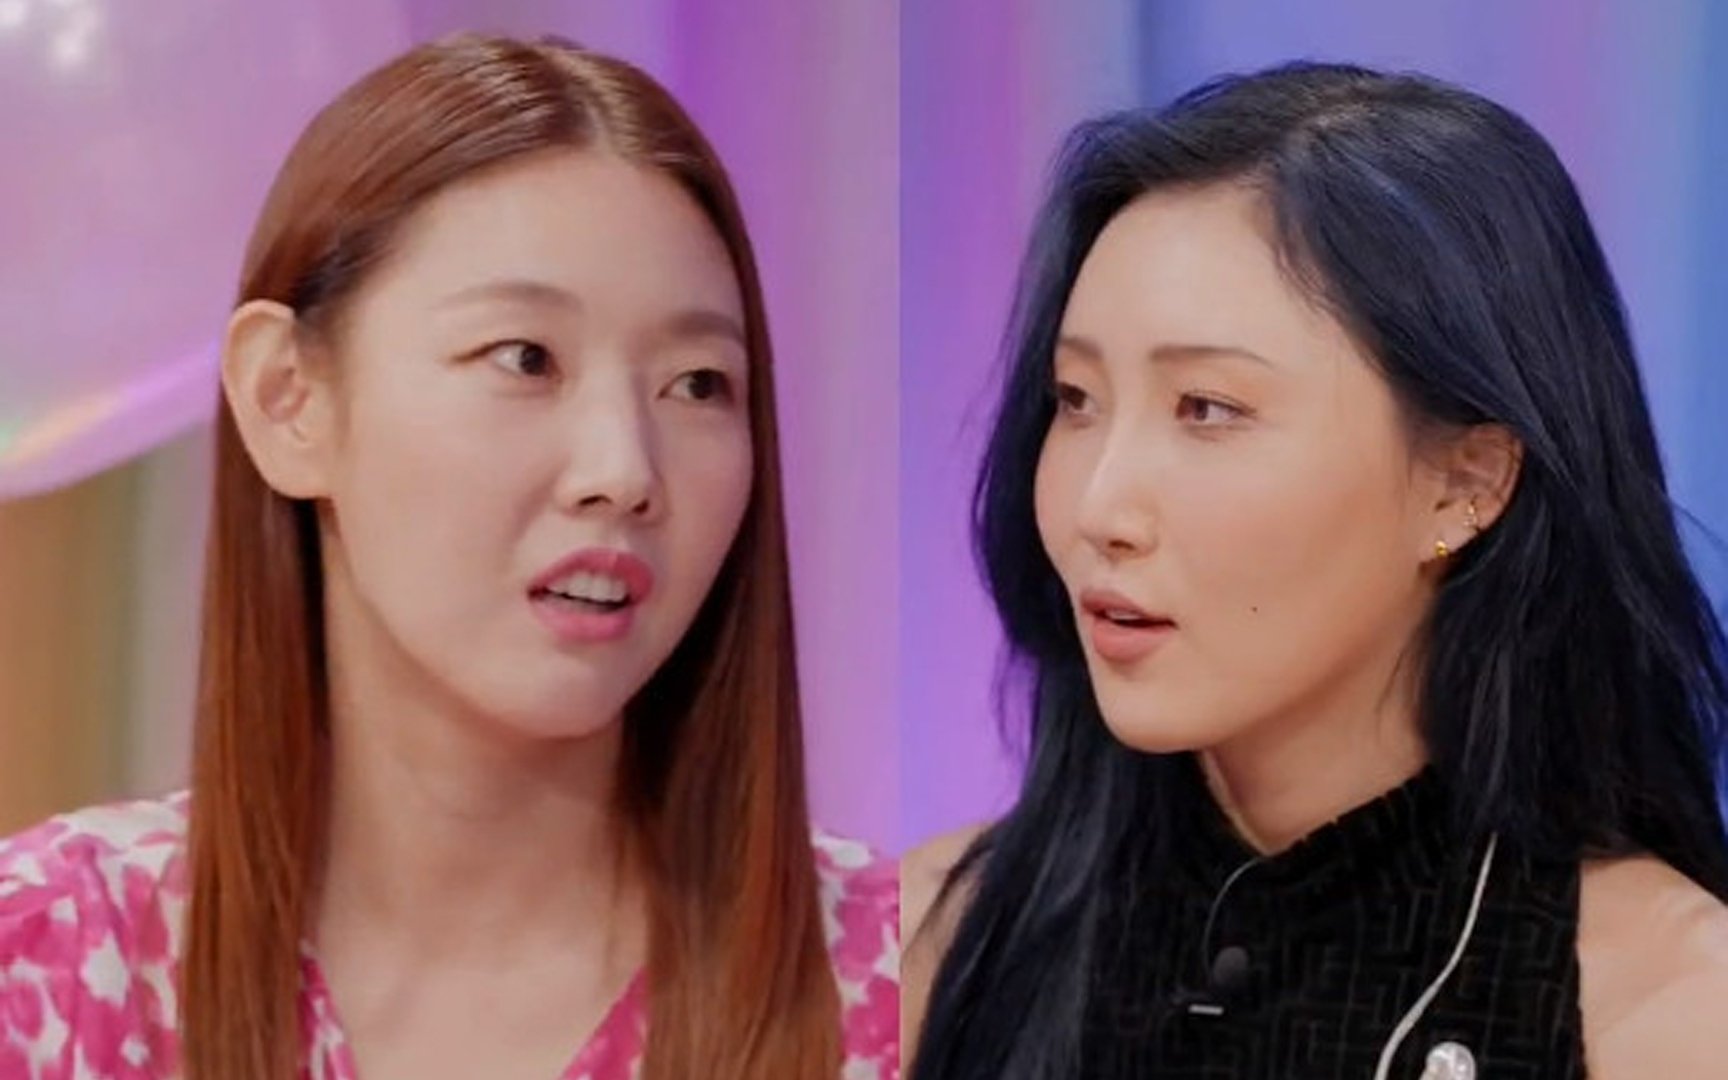 Hwa Sa is the first guest on Han Hye Jin's NAVER NOW show and is asked...